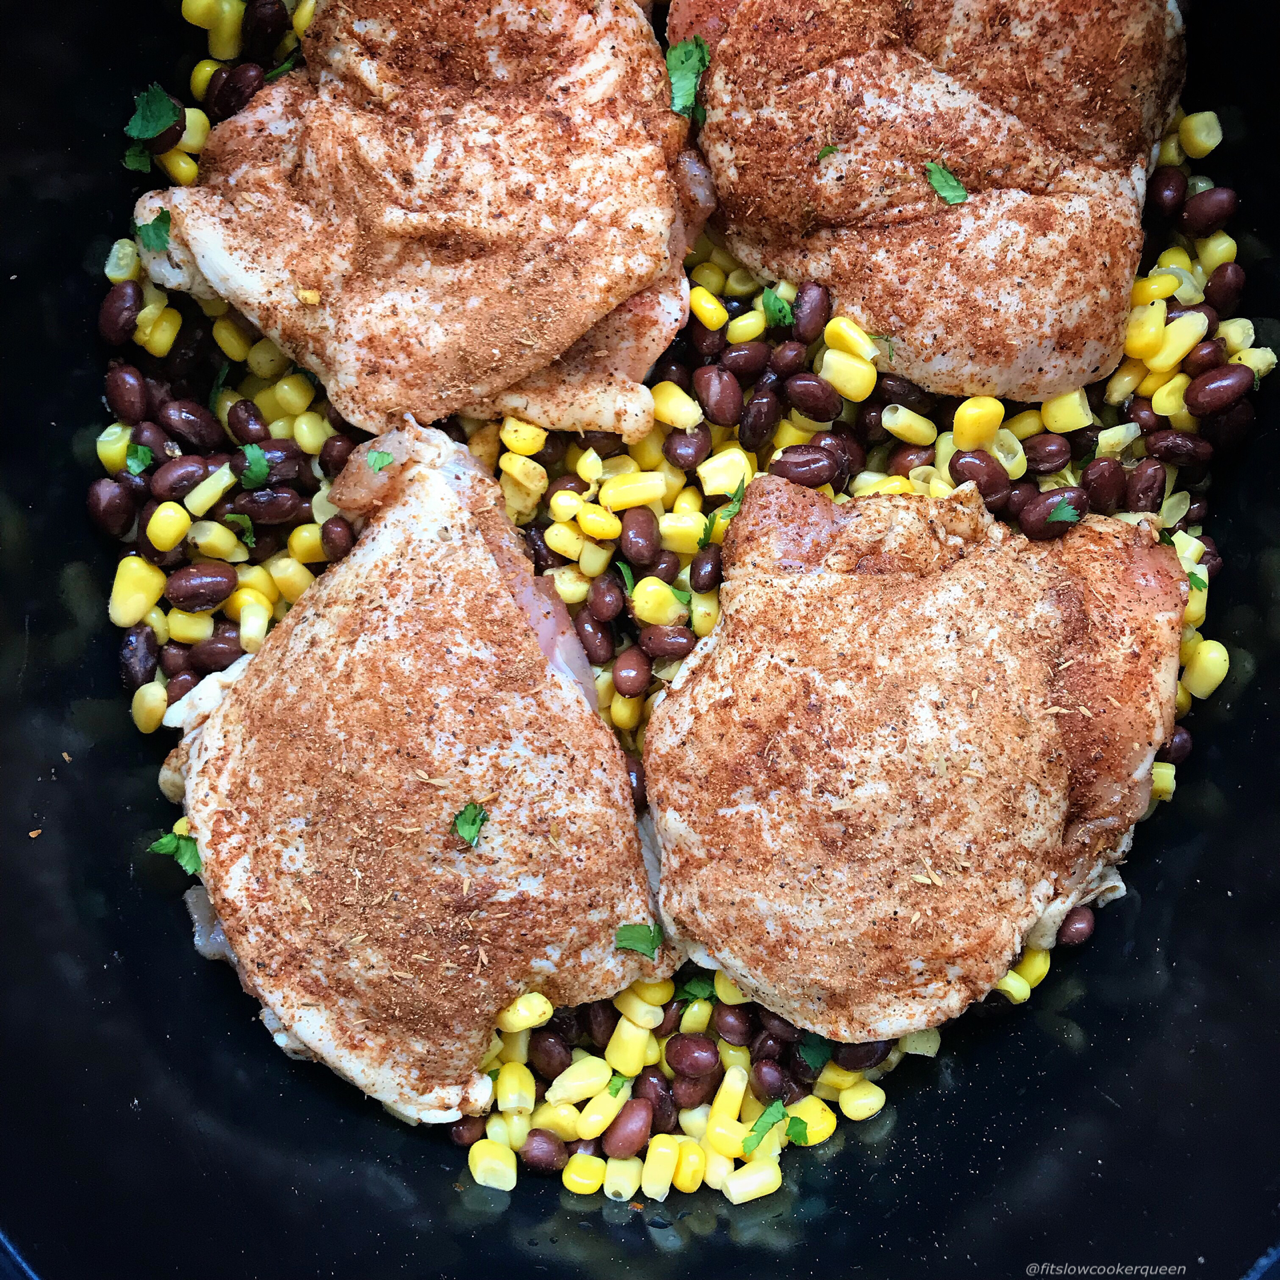 Jerk chicken, quick and in the slow cooker! Grab your favorite jerk seasoning (or use the one provided here) for this easy slow cooker recipe. With only 5 ingredients, you can pretty much use any cut of chicken and serve the finished product so many different ways.